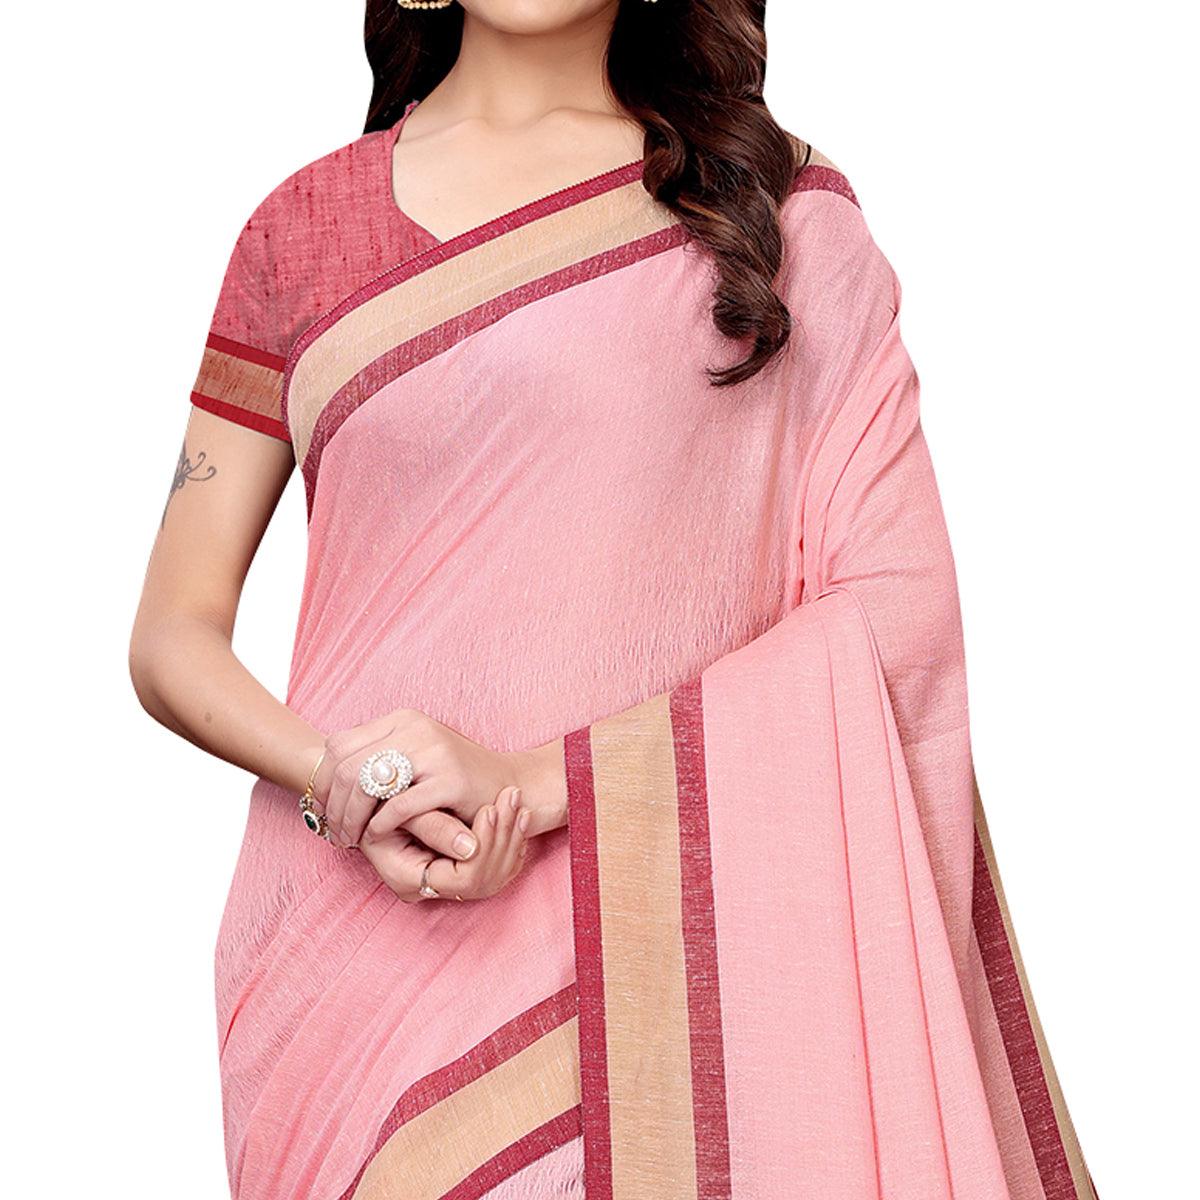 Jazzy Pink Colored Casual Wear Linen Saree - Peachmode